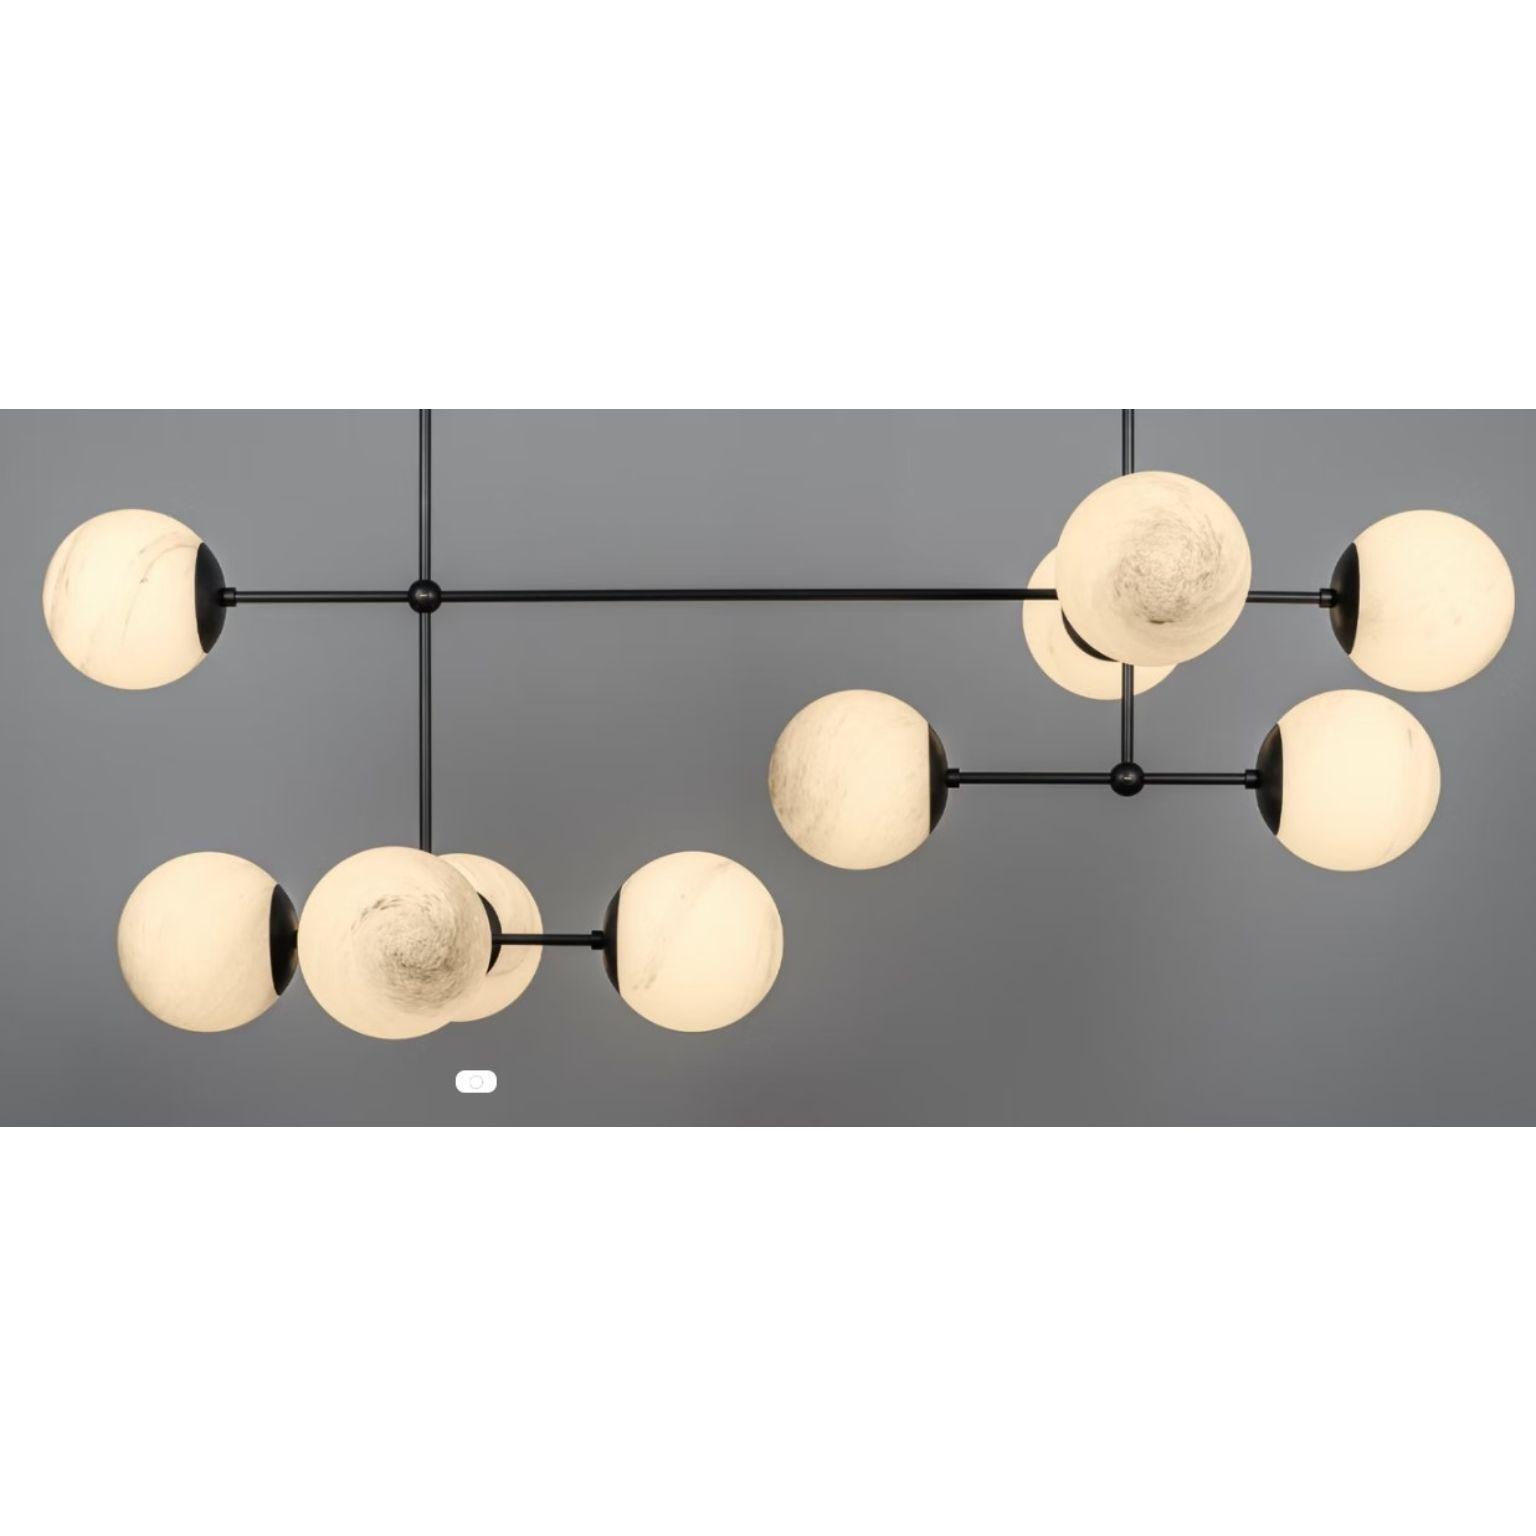 Polish Armstrong Linear Chandelier by Schwung For Sale